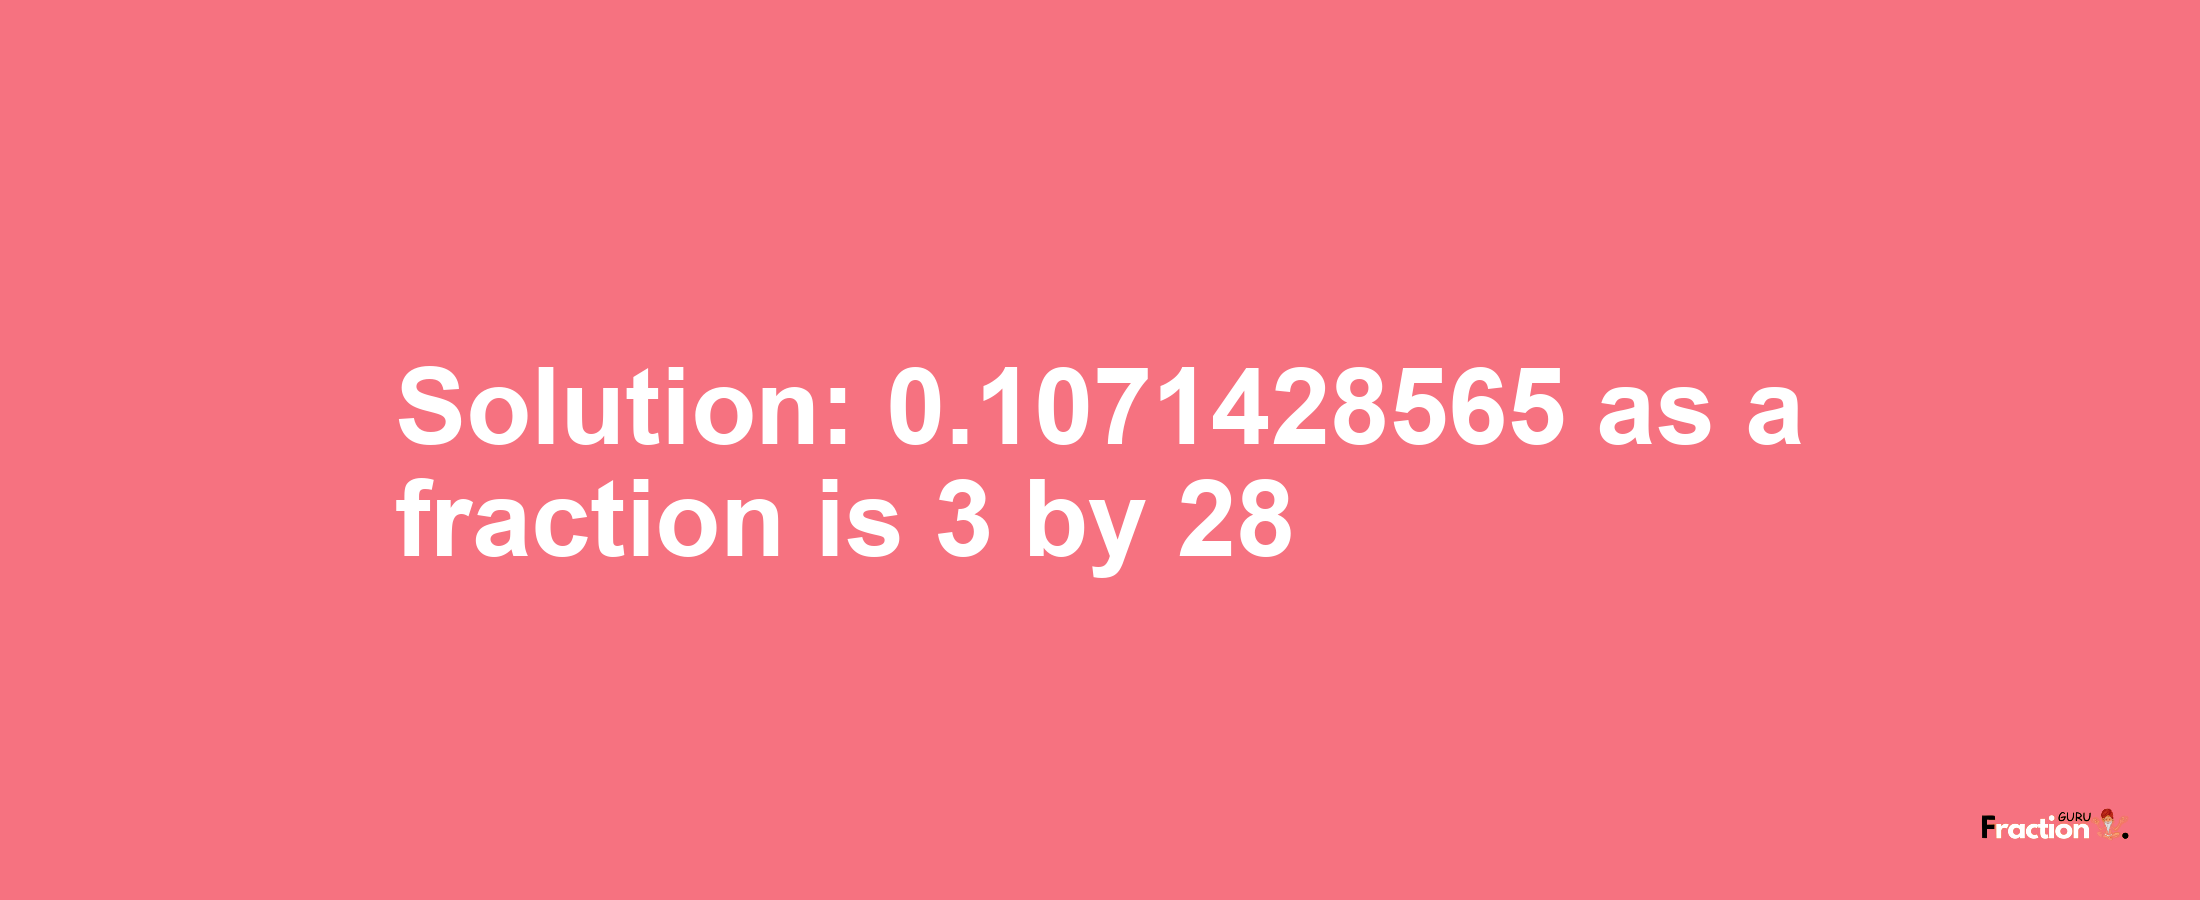 Solution:0.1071428565 as a fraction is 3/28